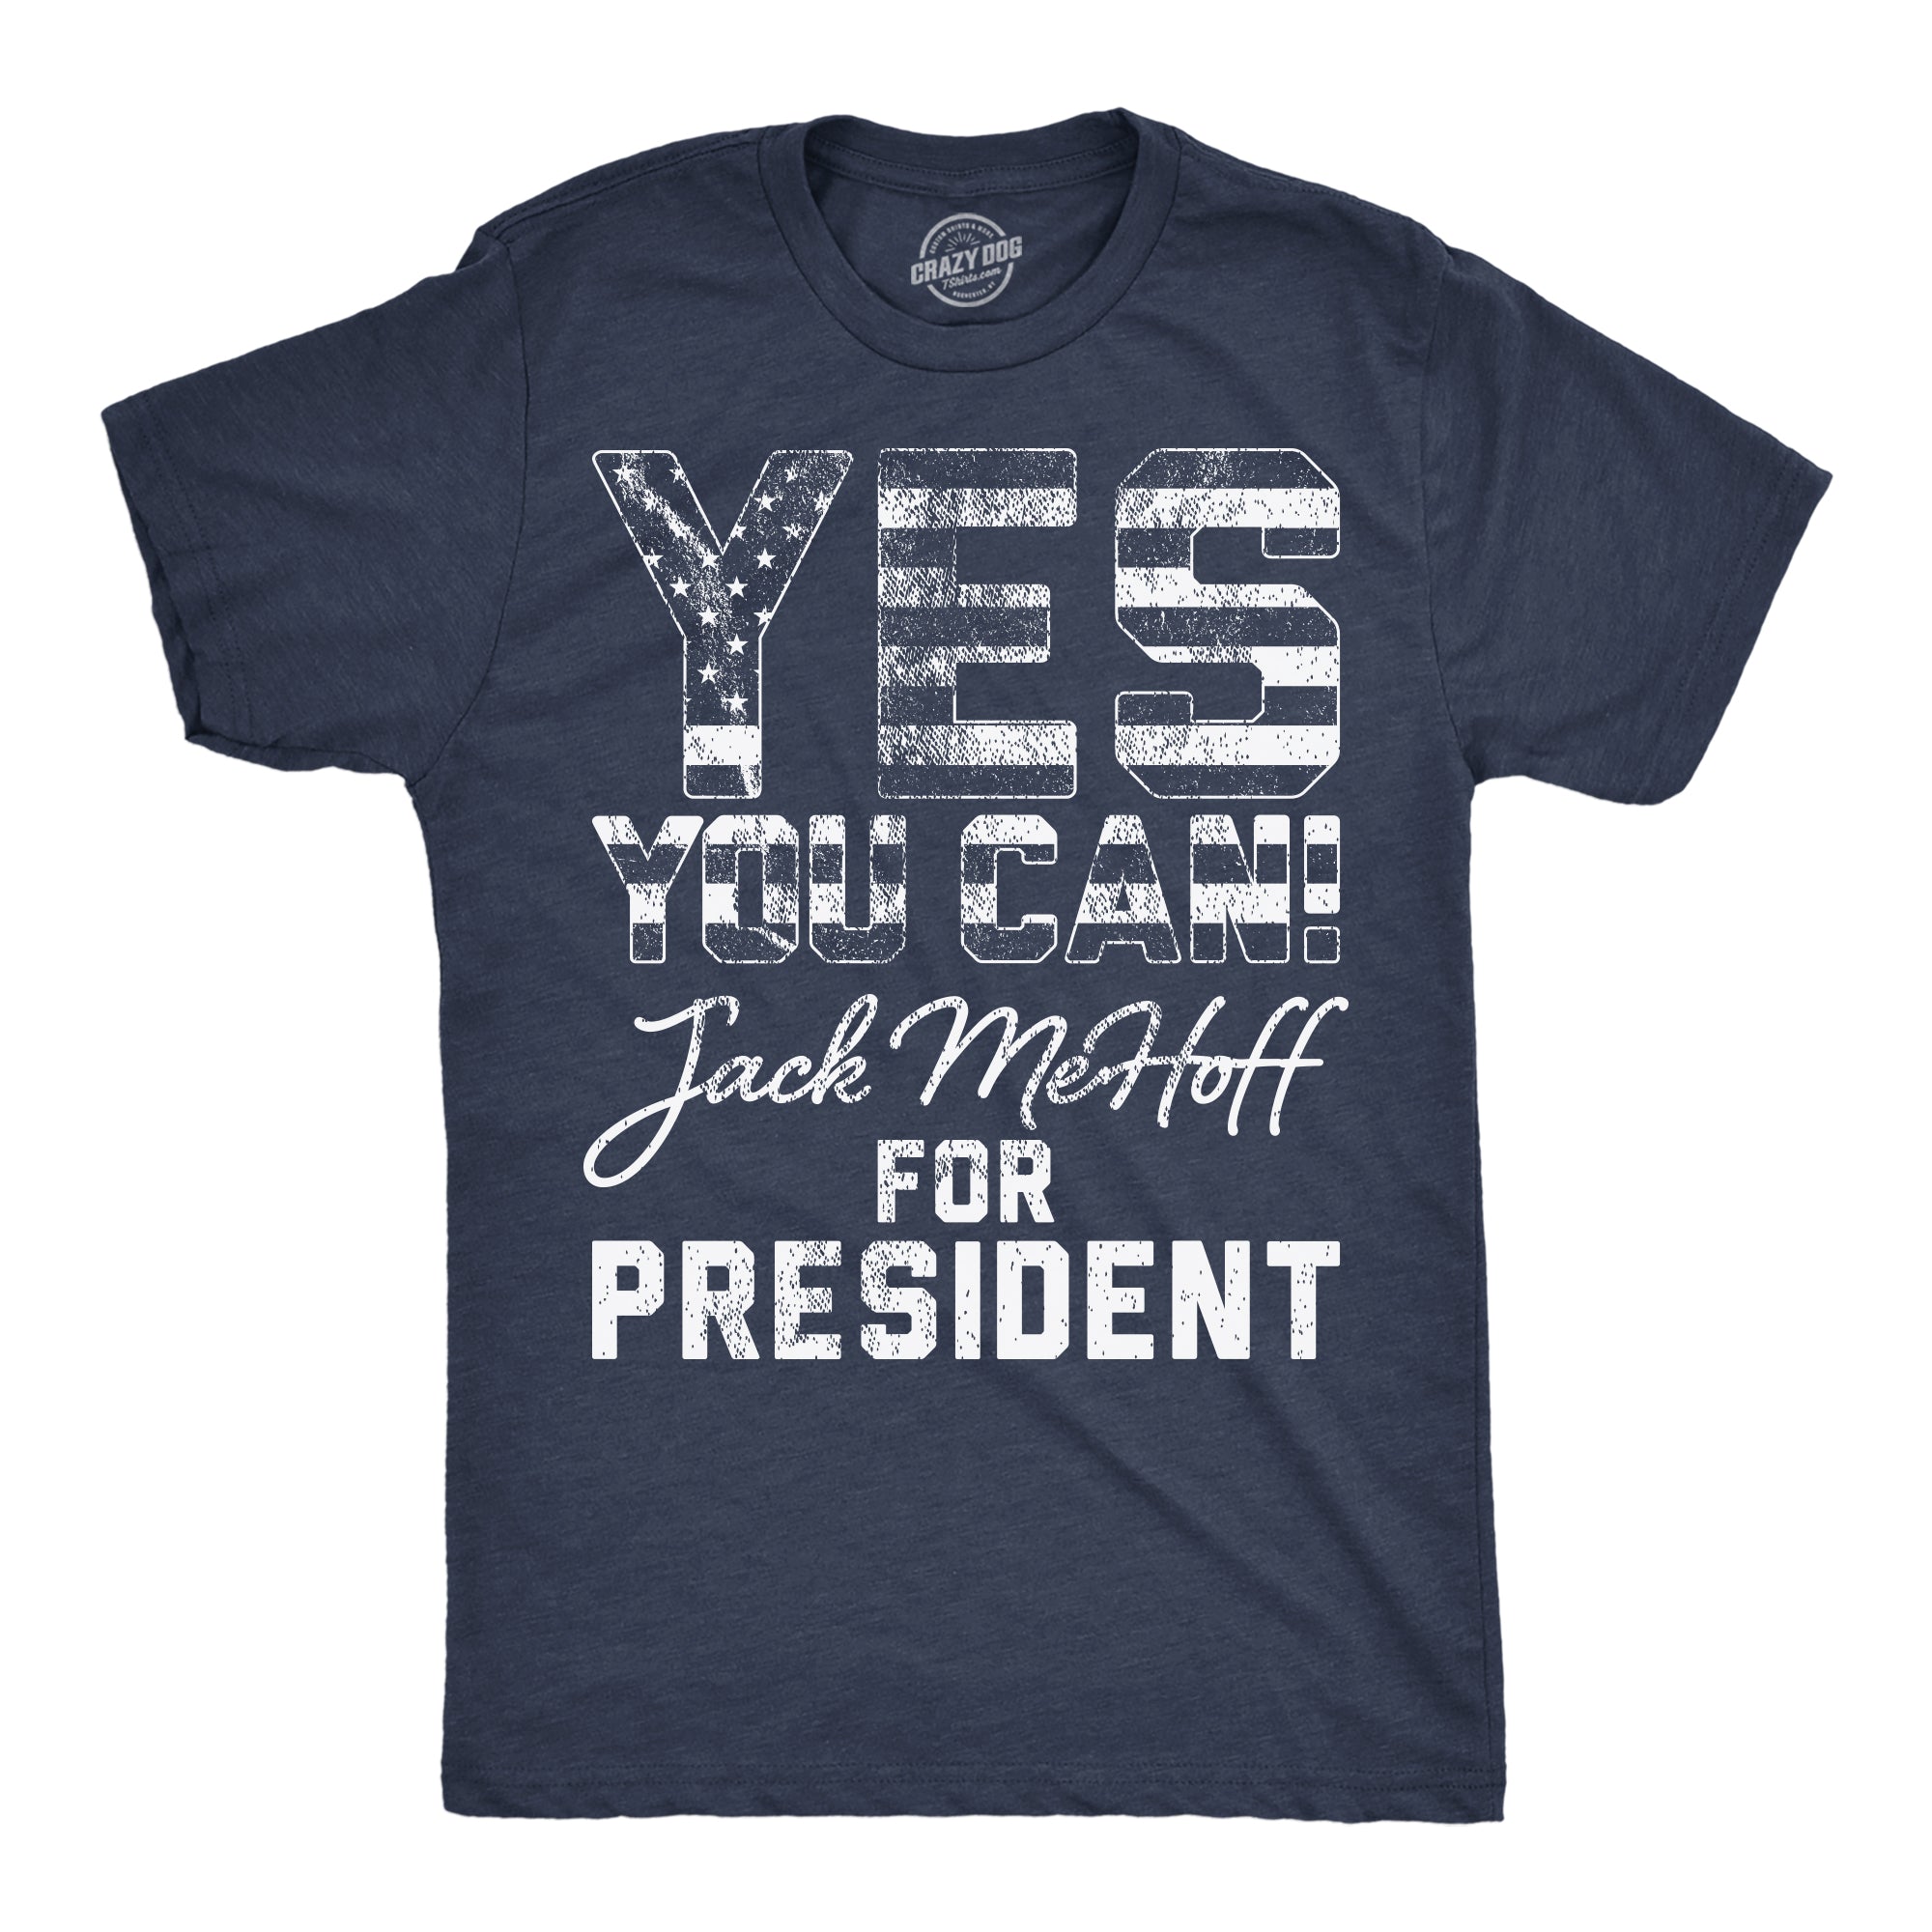 Funny Heather Navy - Jack MeHoff Yes You Can Jack MeHoff For President Mens T Shirt Nerdy Political sarcastic sex Tee